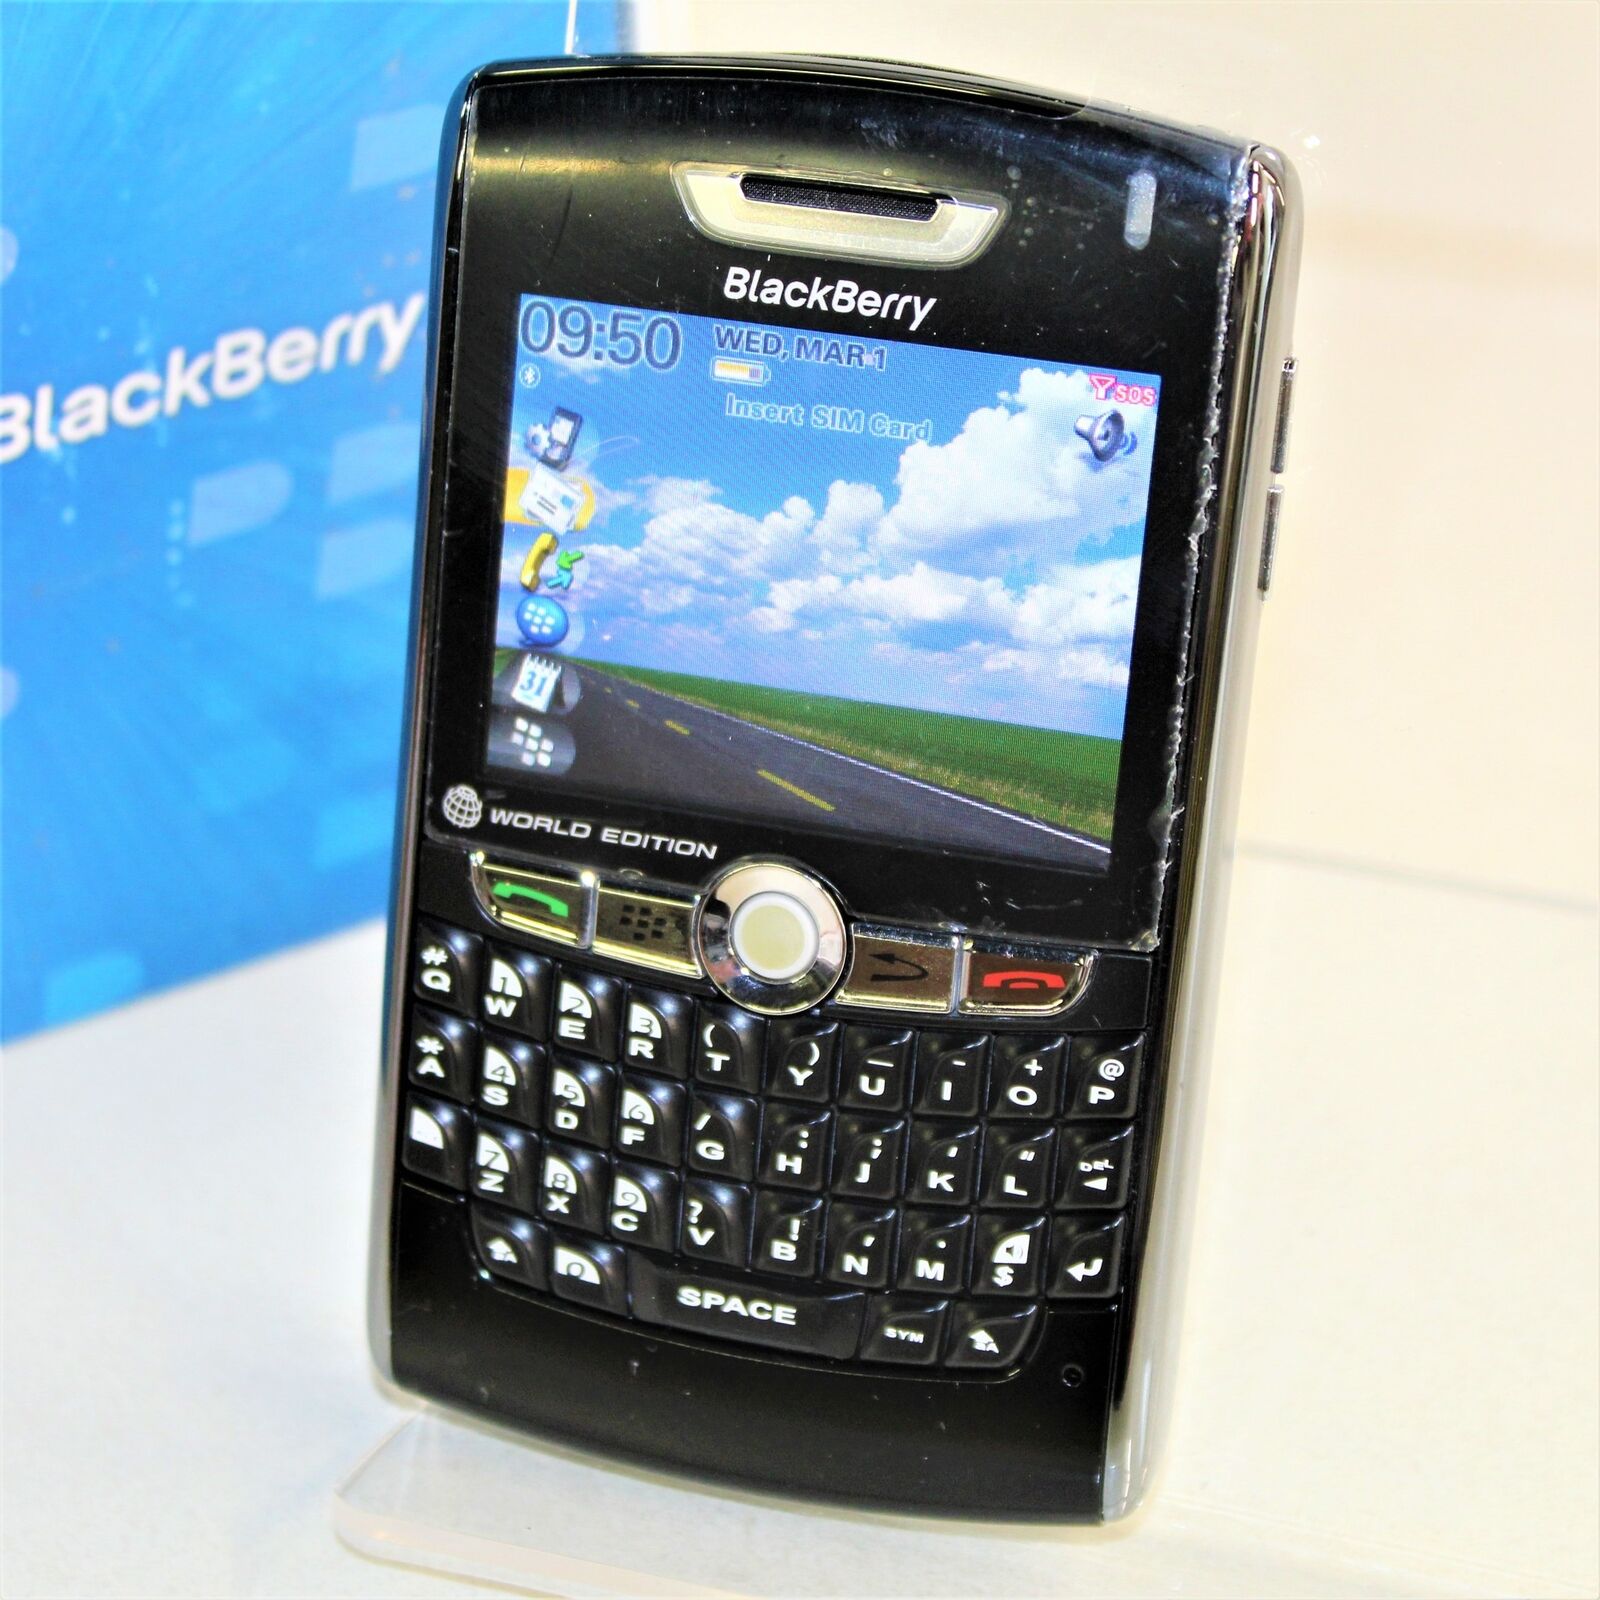  Blackberry 8800 (T-Mobile) World Edition Smartphone QWERTY 2G - Black, 64 MB 